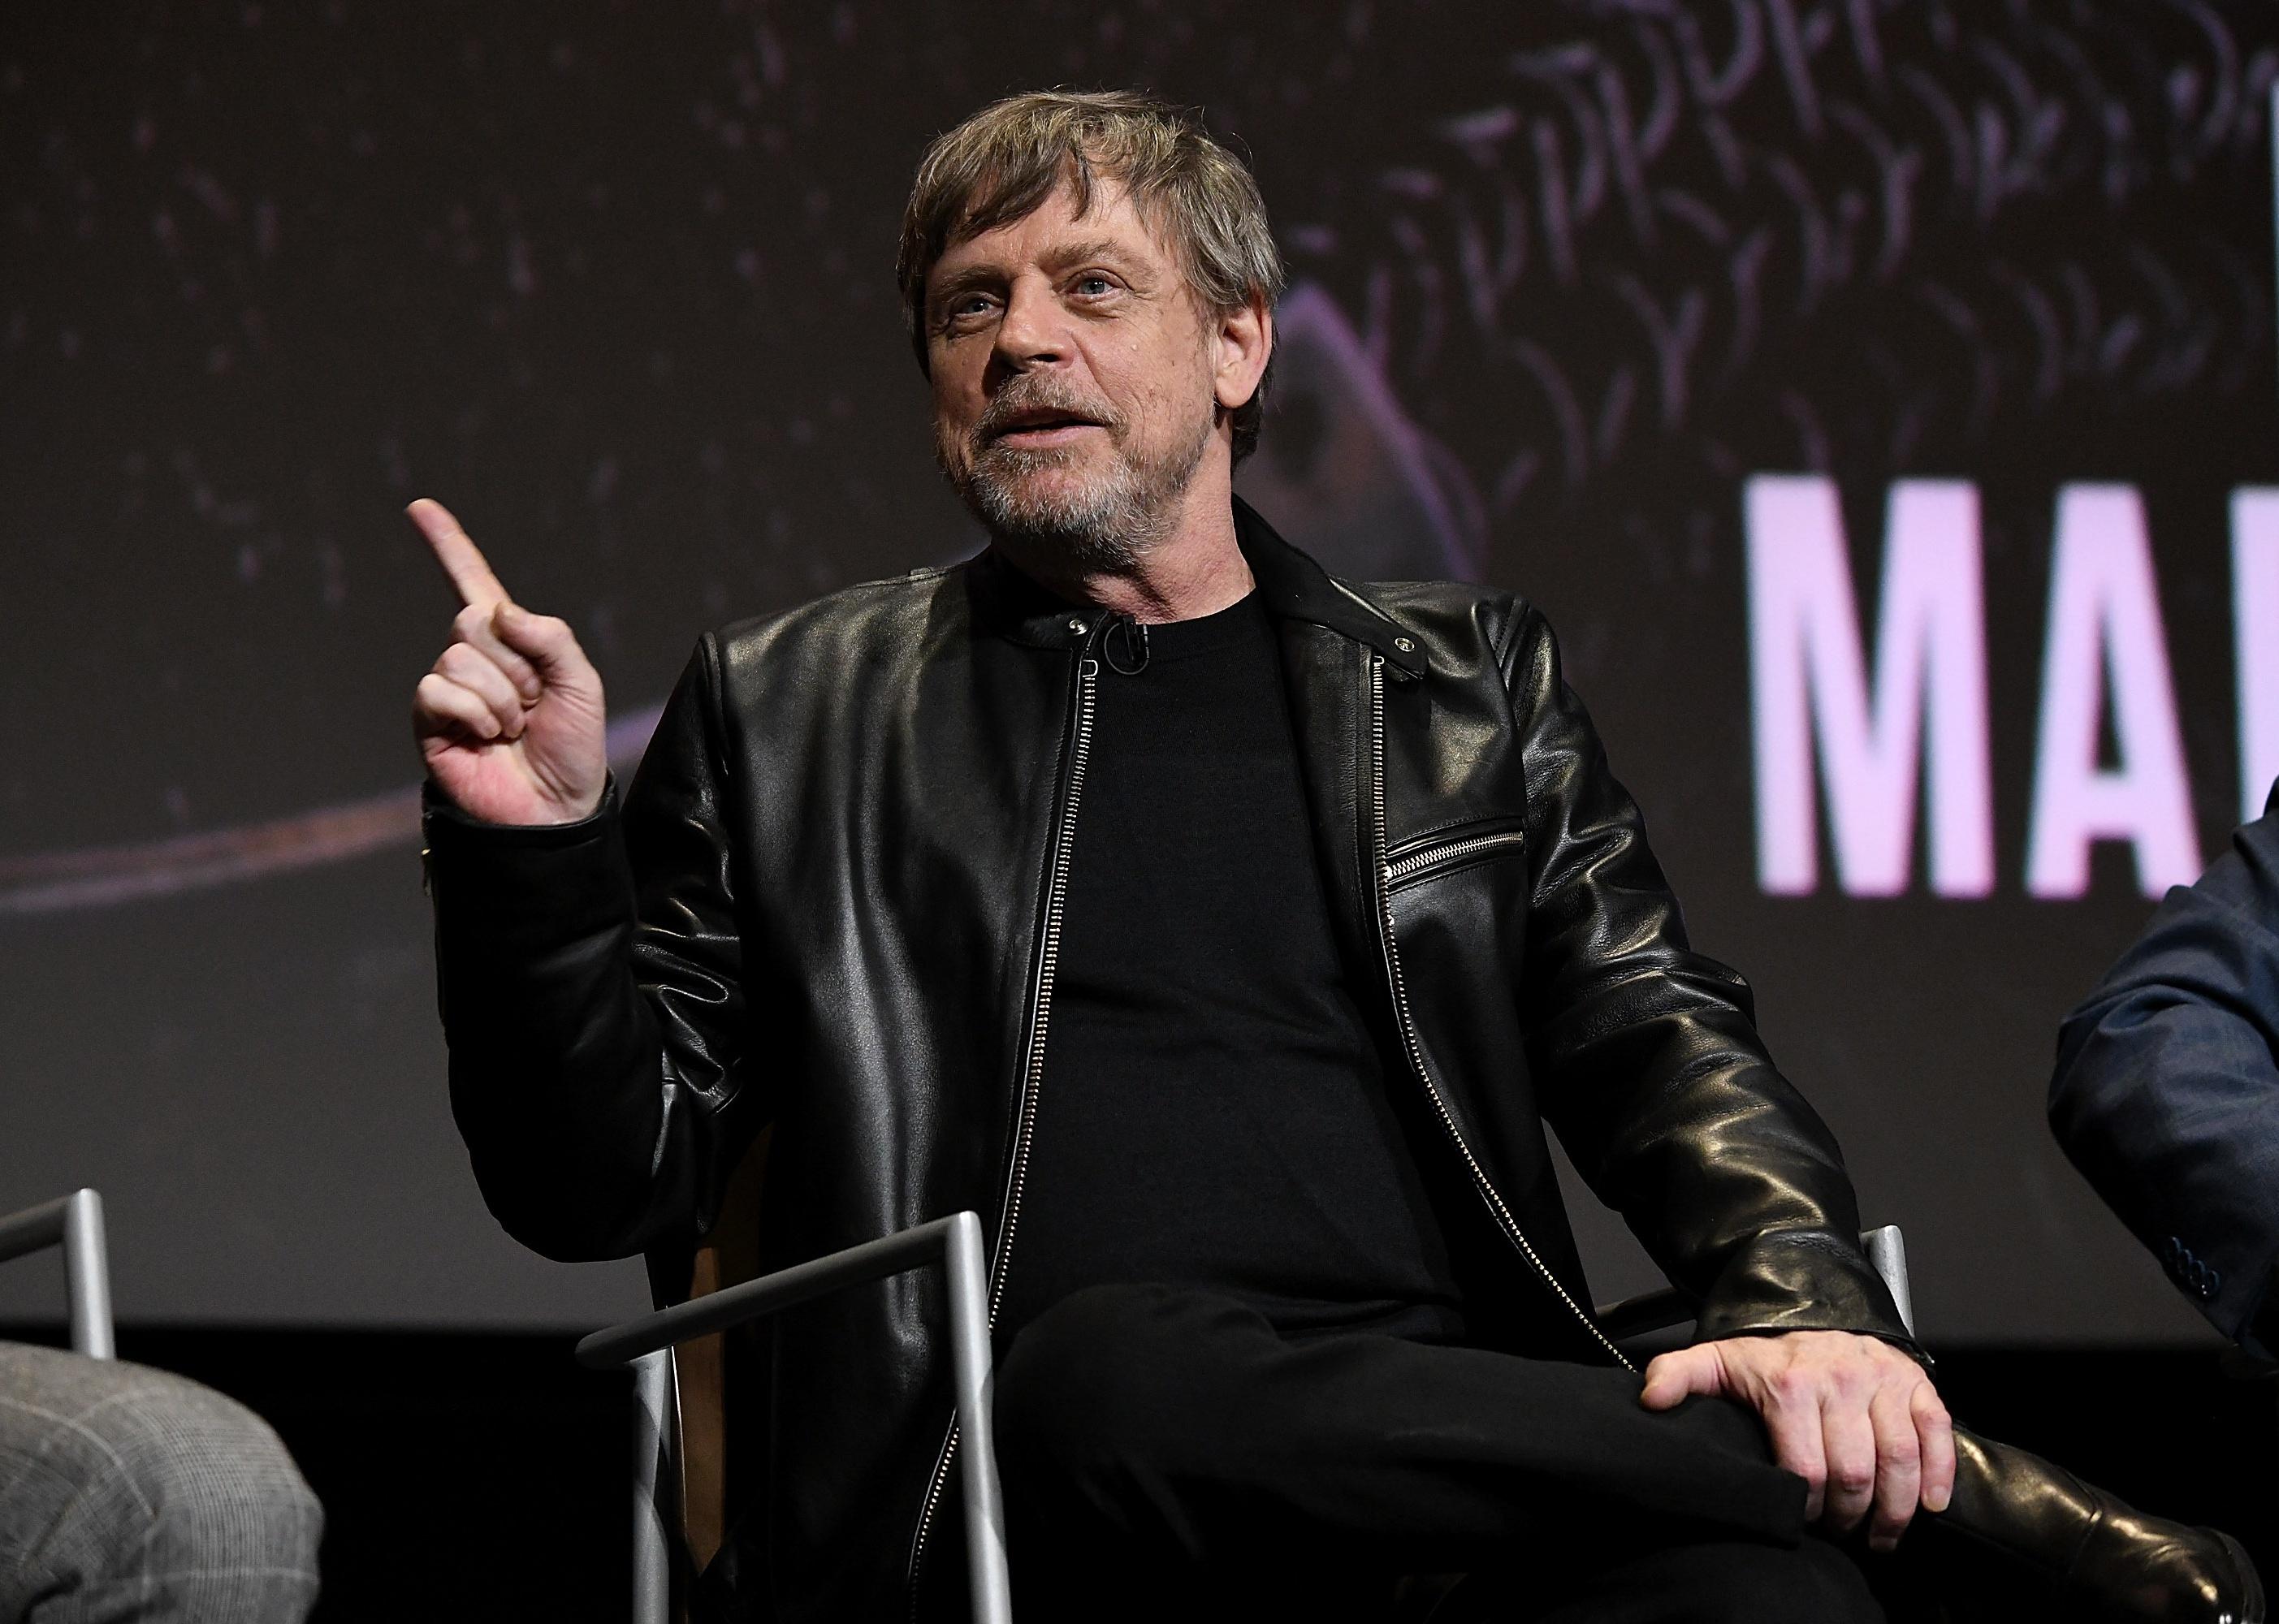 Mark Hamill in a black leather jacket sitting onstage.